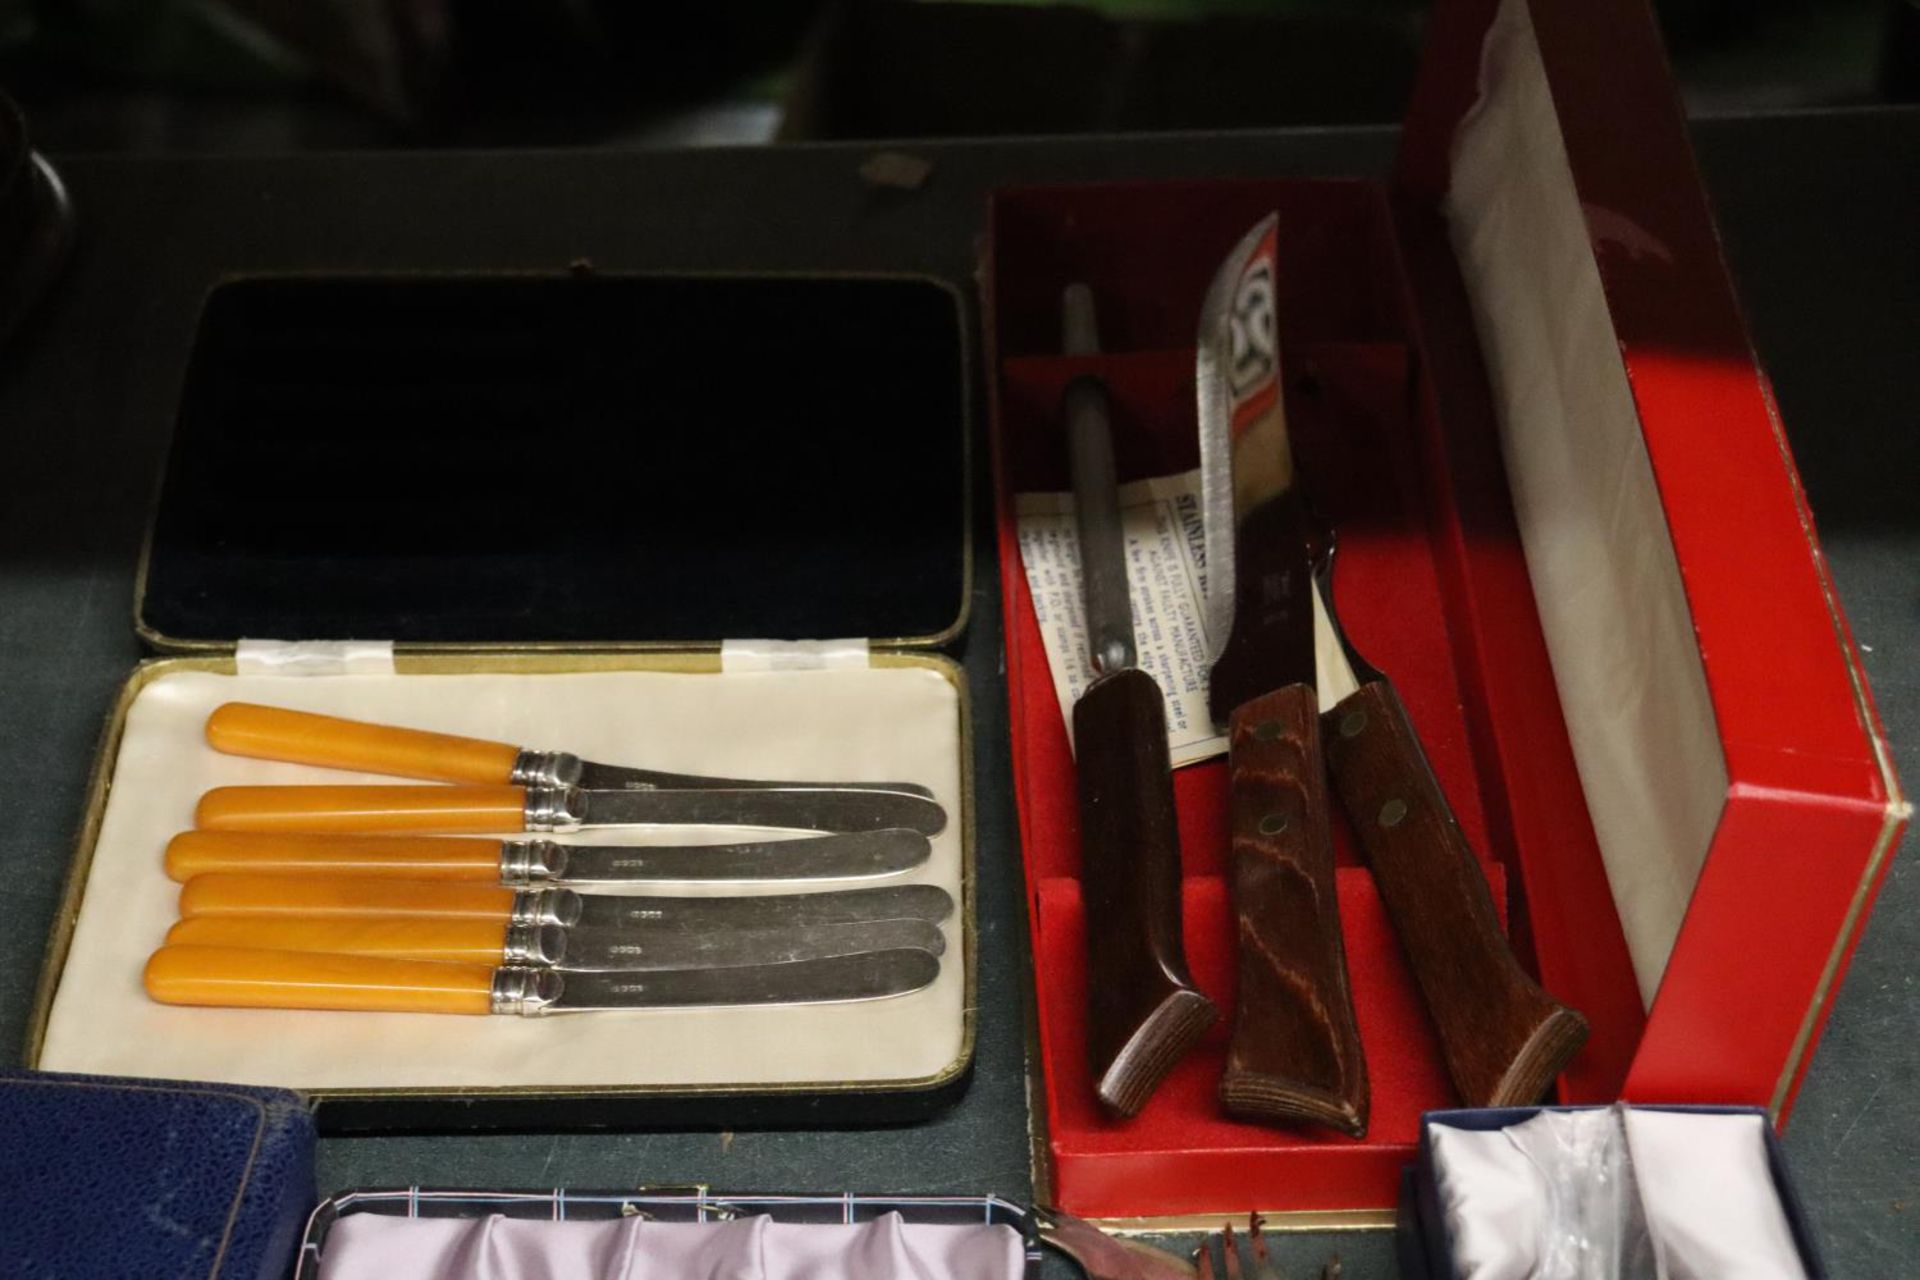 A QUANTITY OF BOXED FLATWARE TO INCLUDE ACARVING SET, AYNSLEY CAKE KNIFE, WOODEN NAPKIN RINGS, ETC - Image 2 of 6